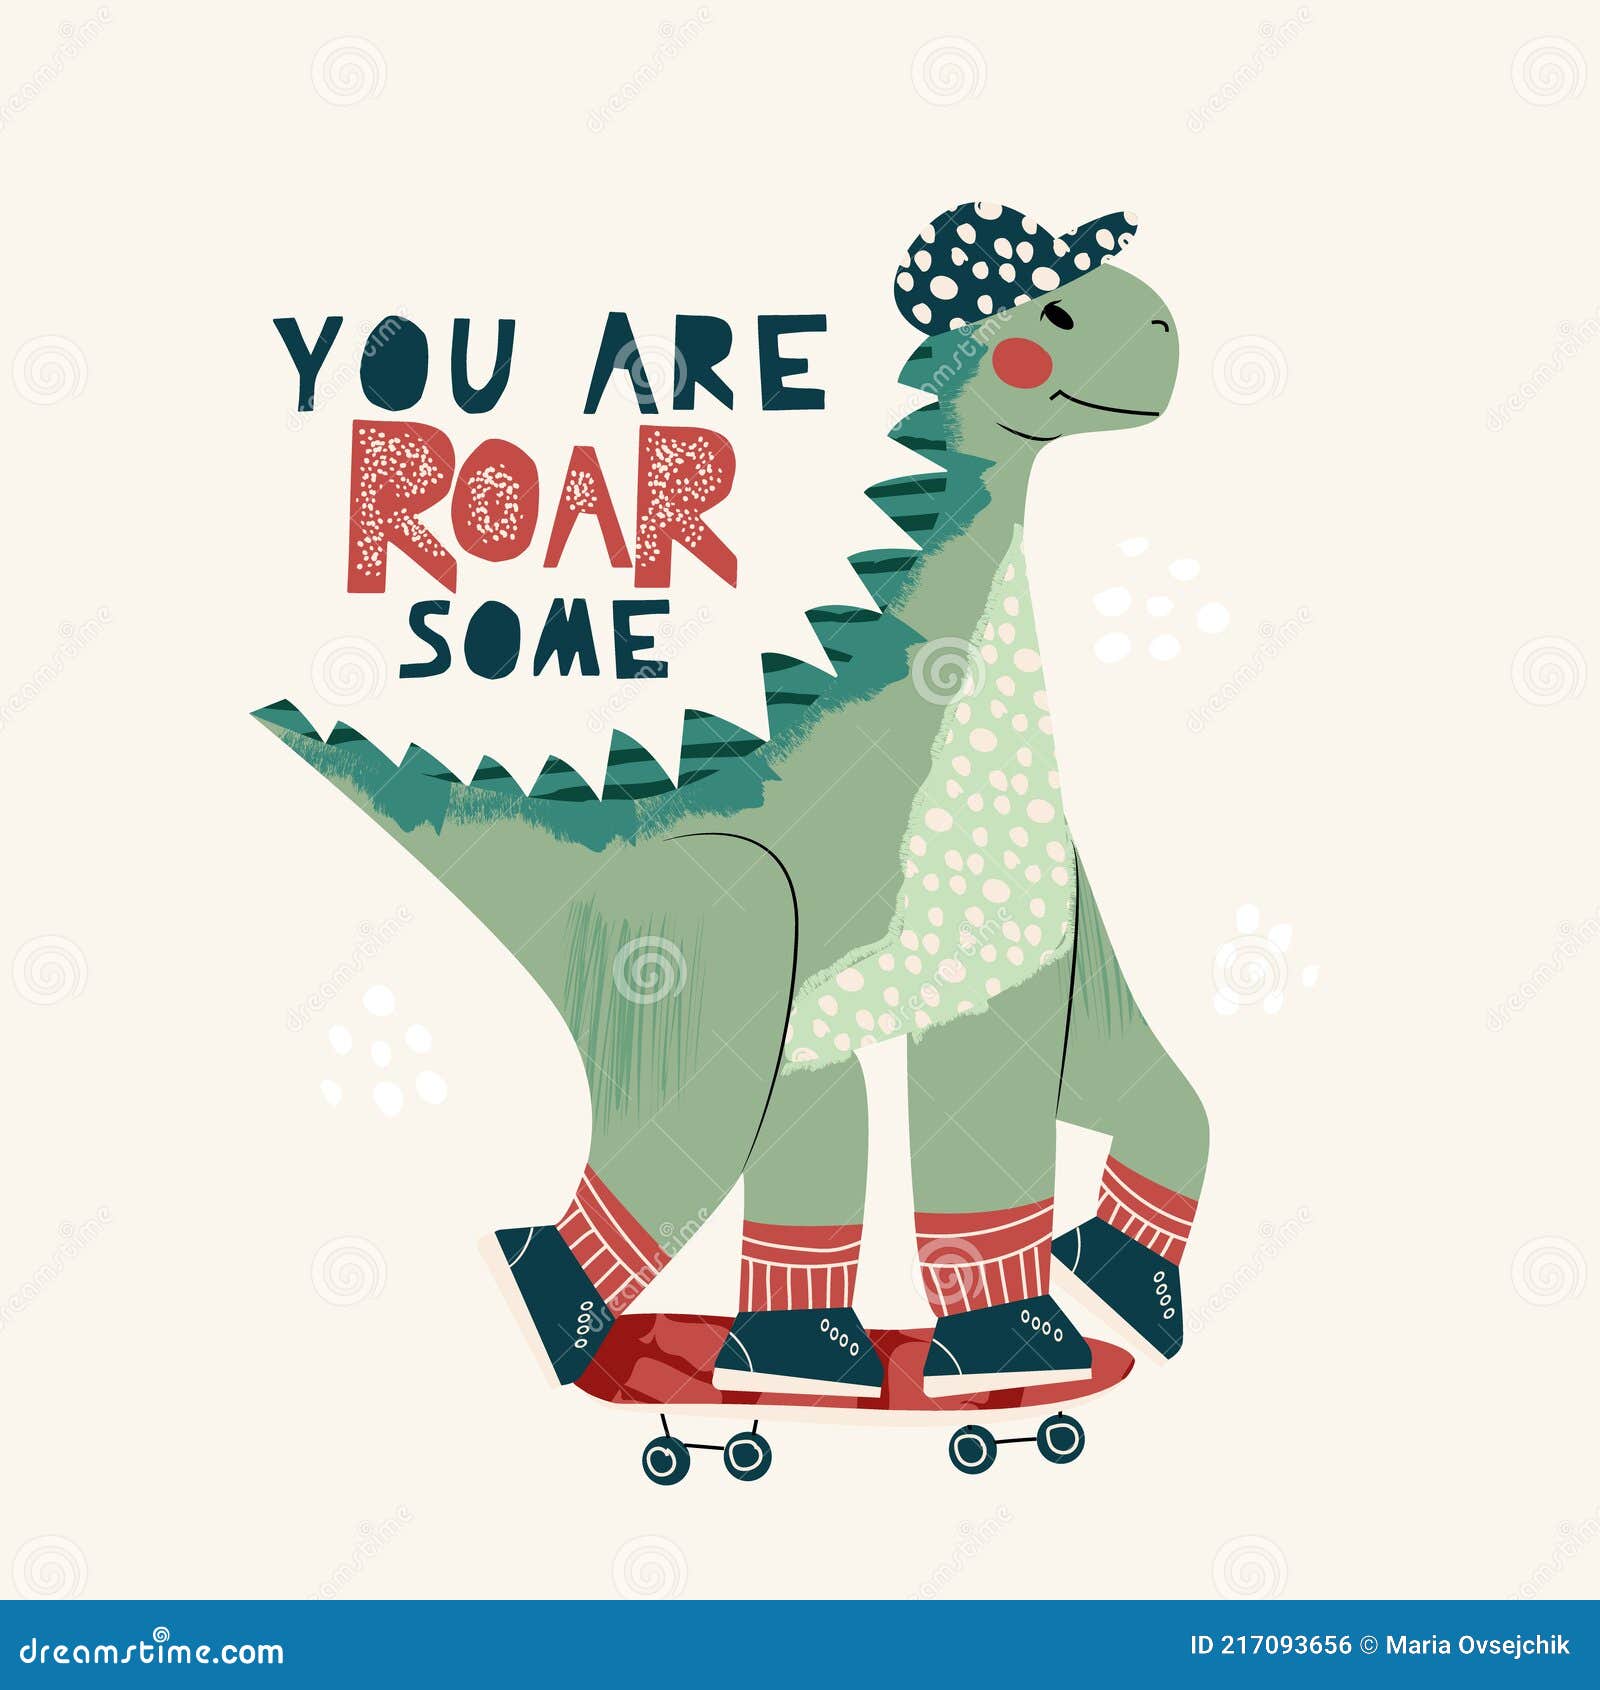 Totally roarsome (awesome) - Cute Dino print design - funny hand